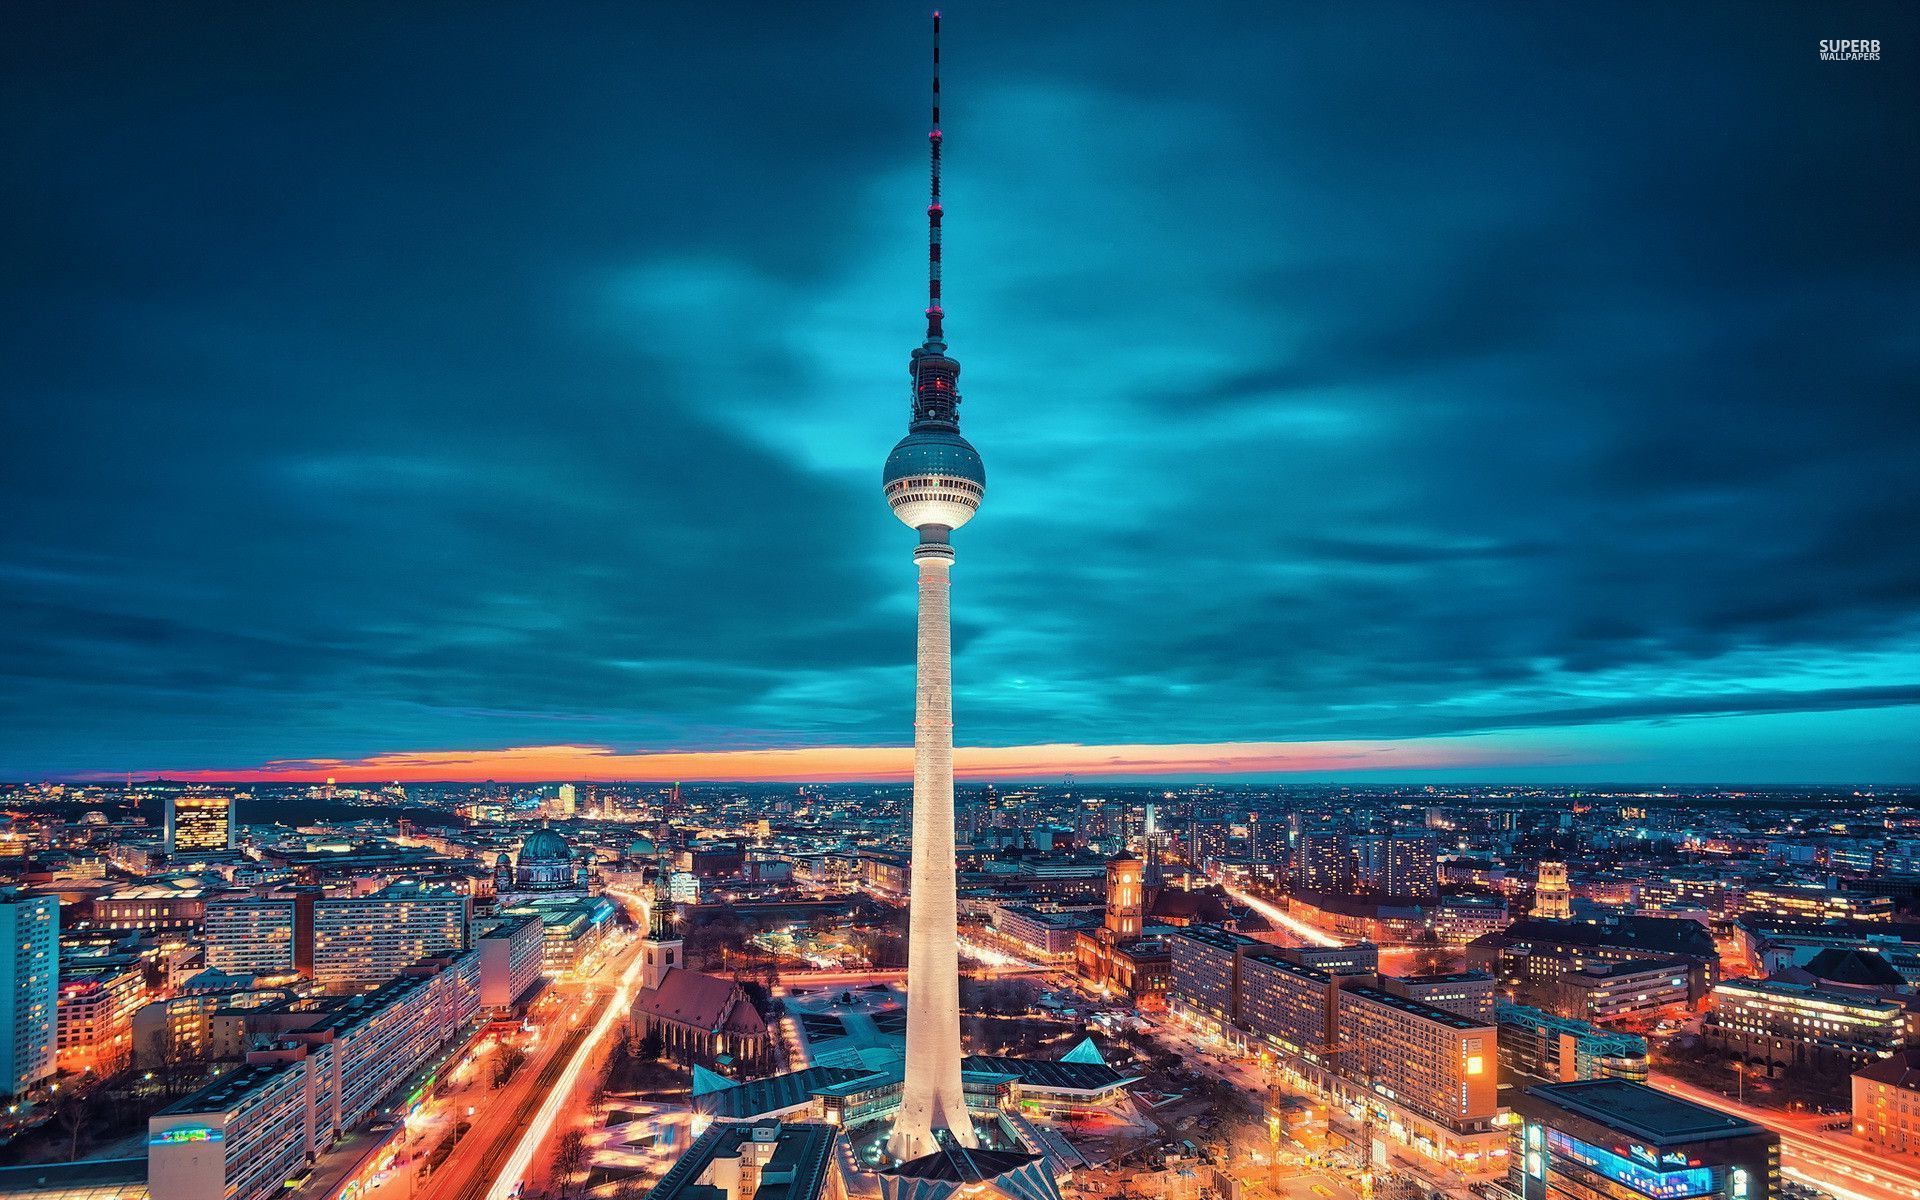 Television Tower Berlin wallpapers | Television Tower Berlin stock ...